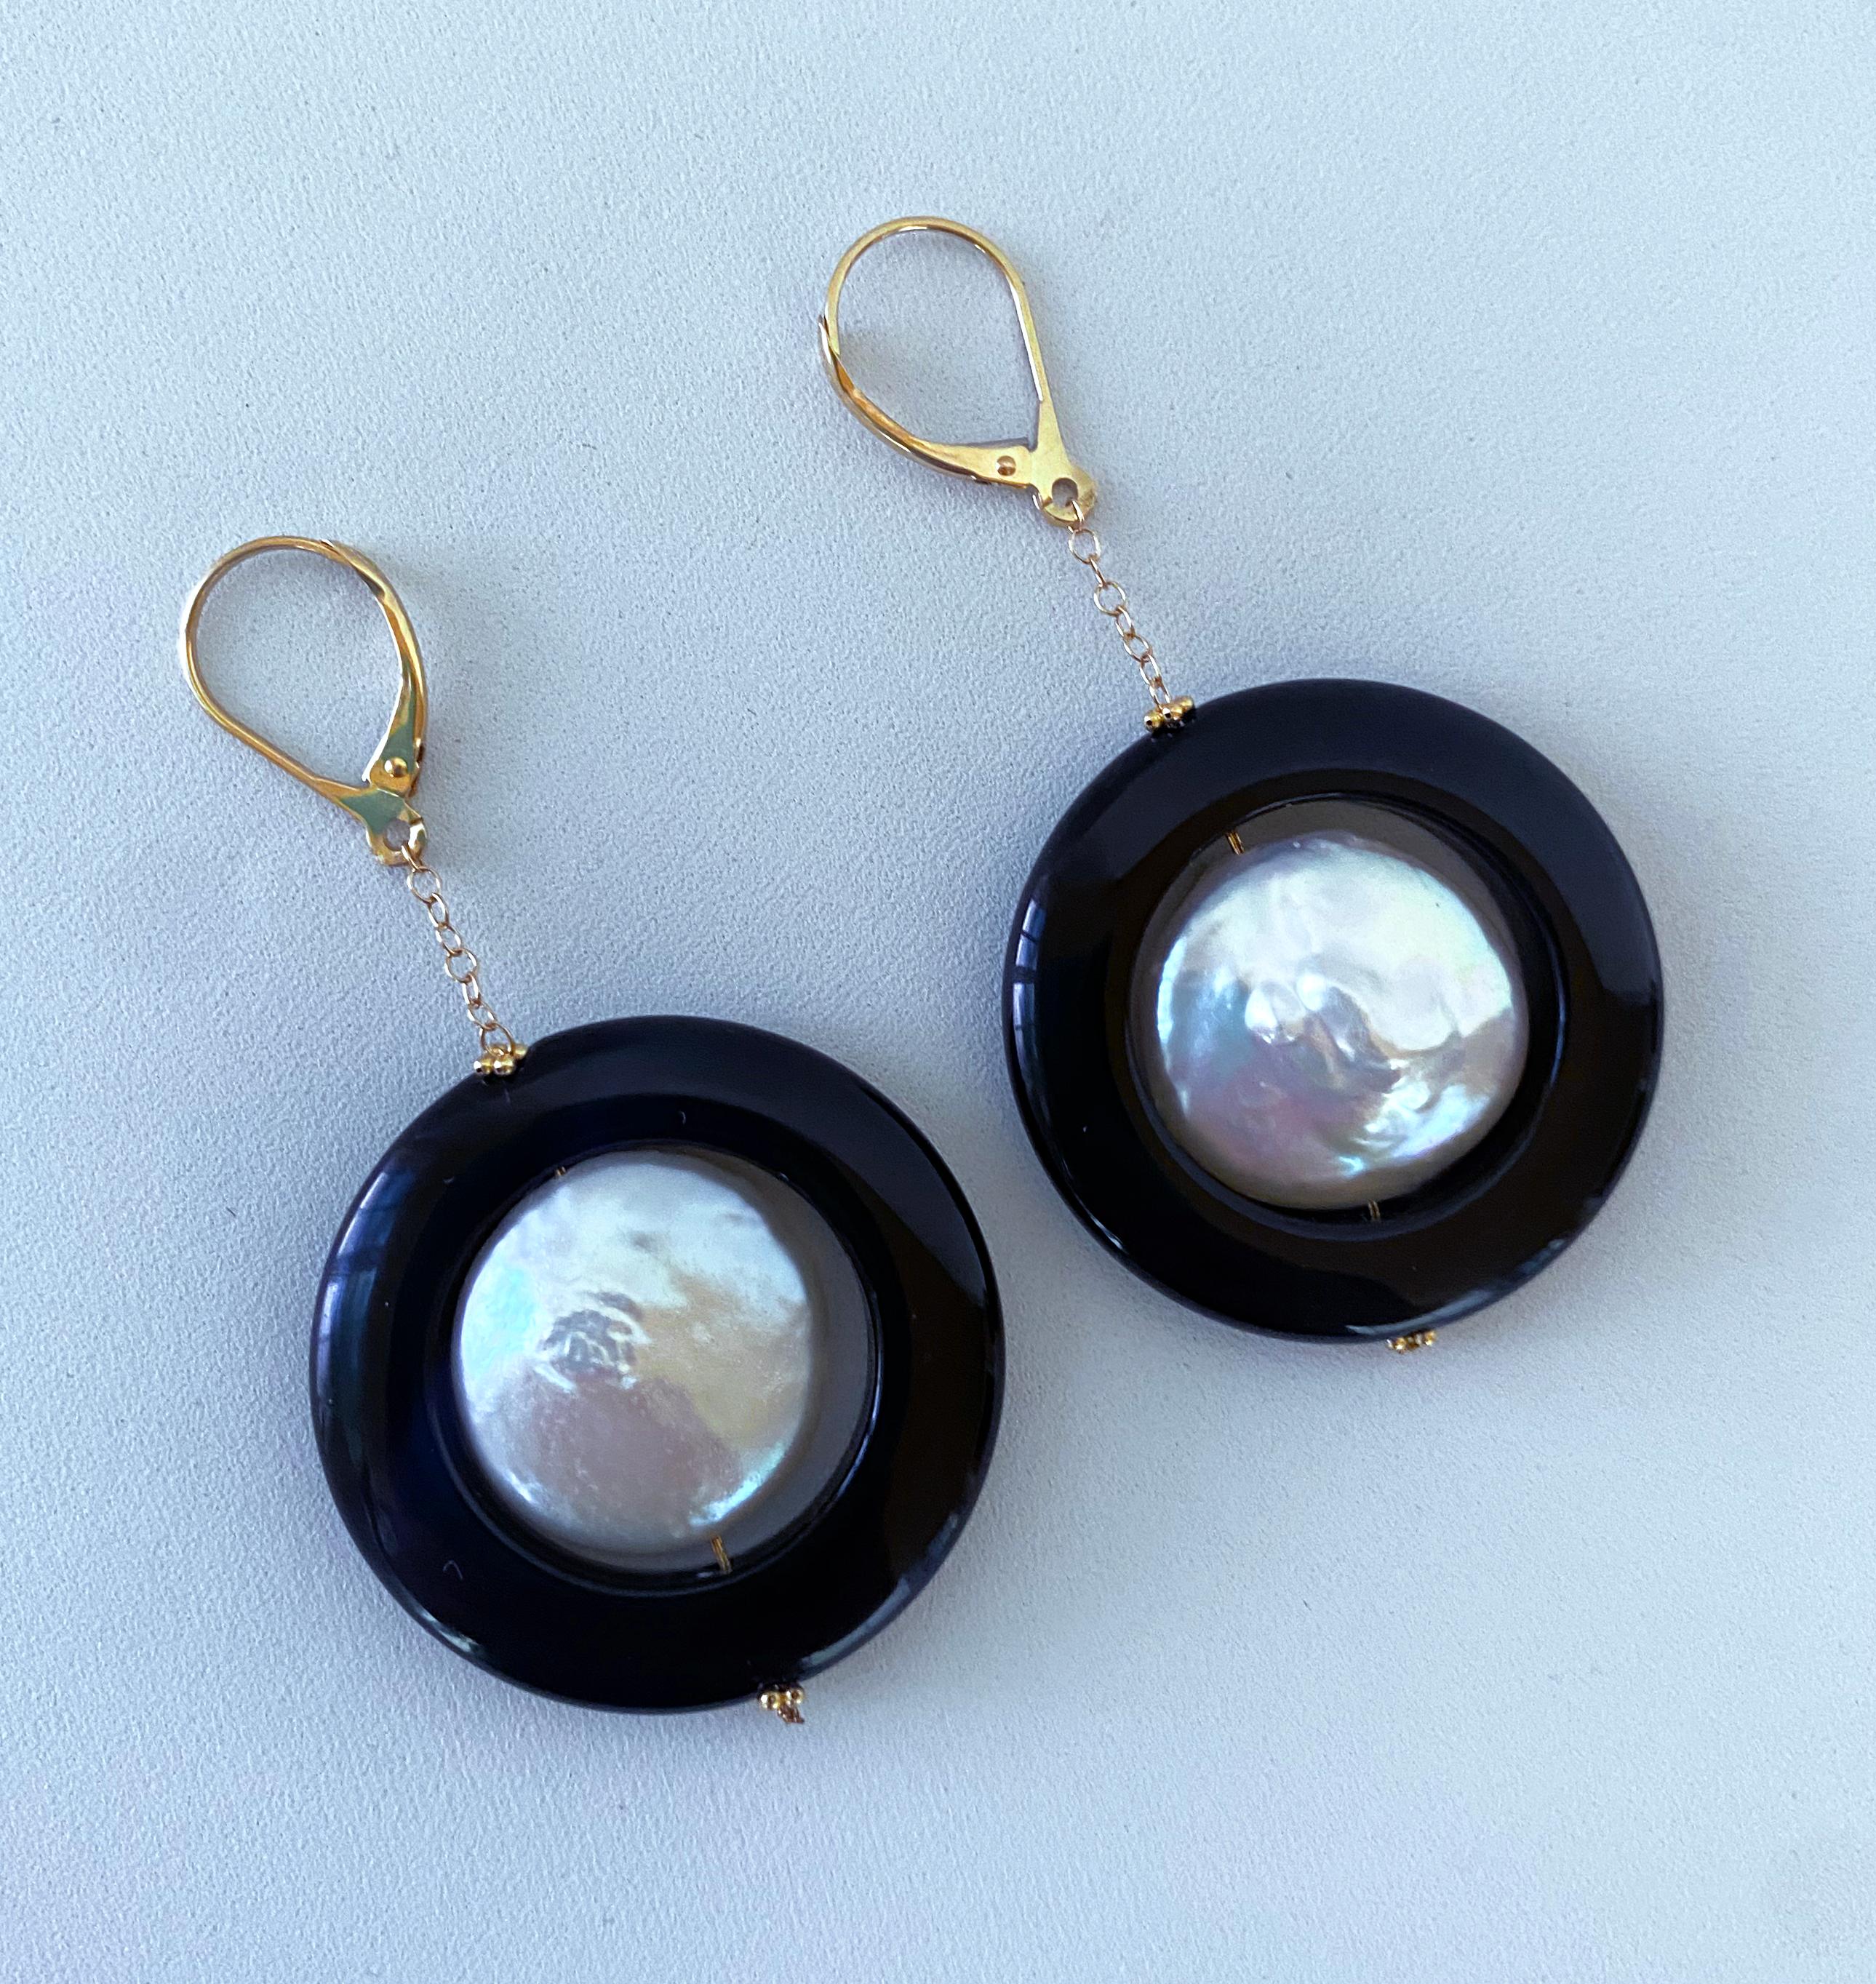 Gorgeous pair of Earrings by Marina J. This pair is made of two Baroque Pearls, displaying a beautiful iridescent luster that softly flashes hues of pinks and blues. The Pearls are suspended within a black Onyx ring which hangs off a solid 14k